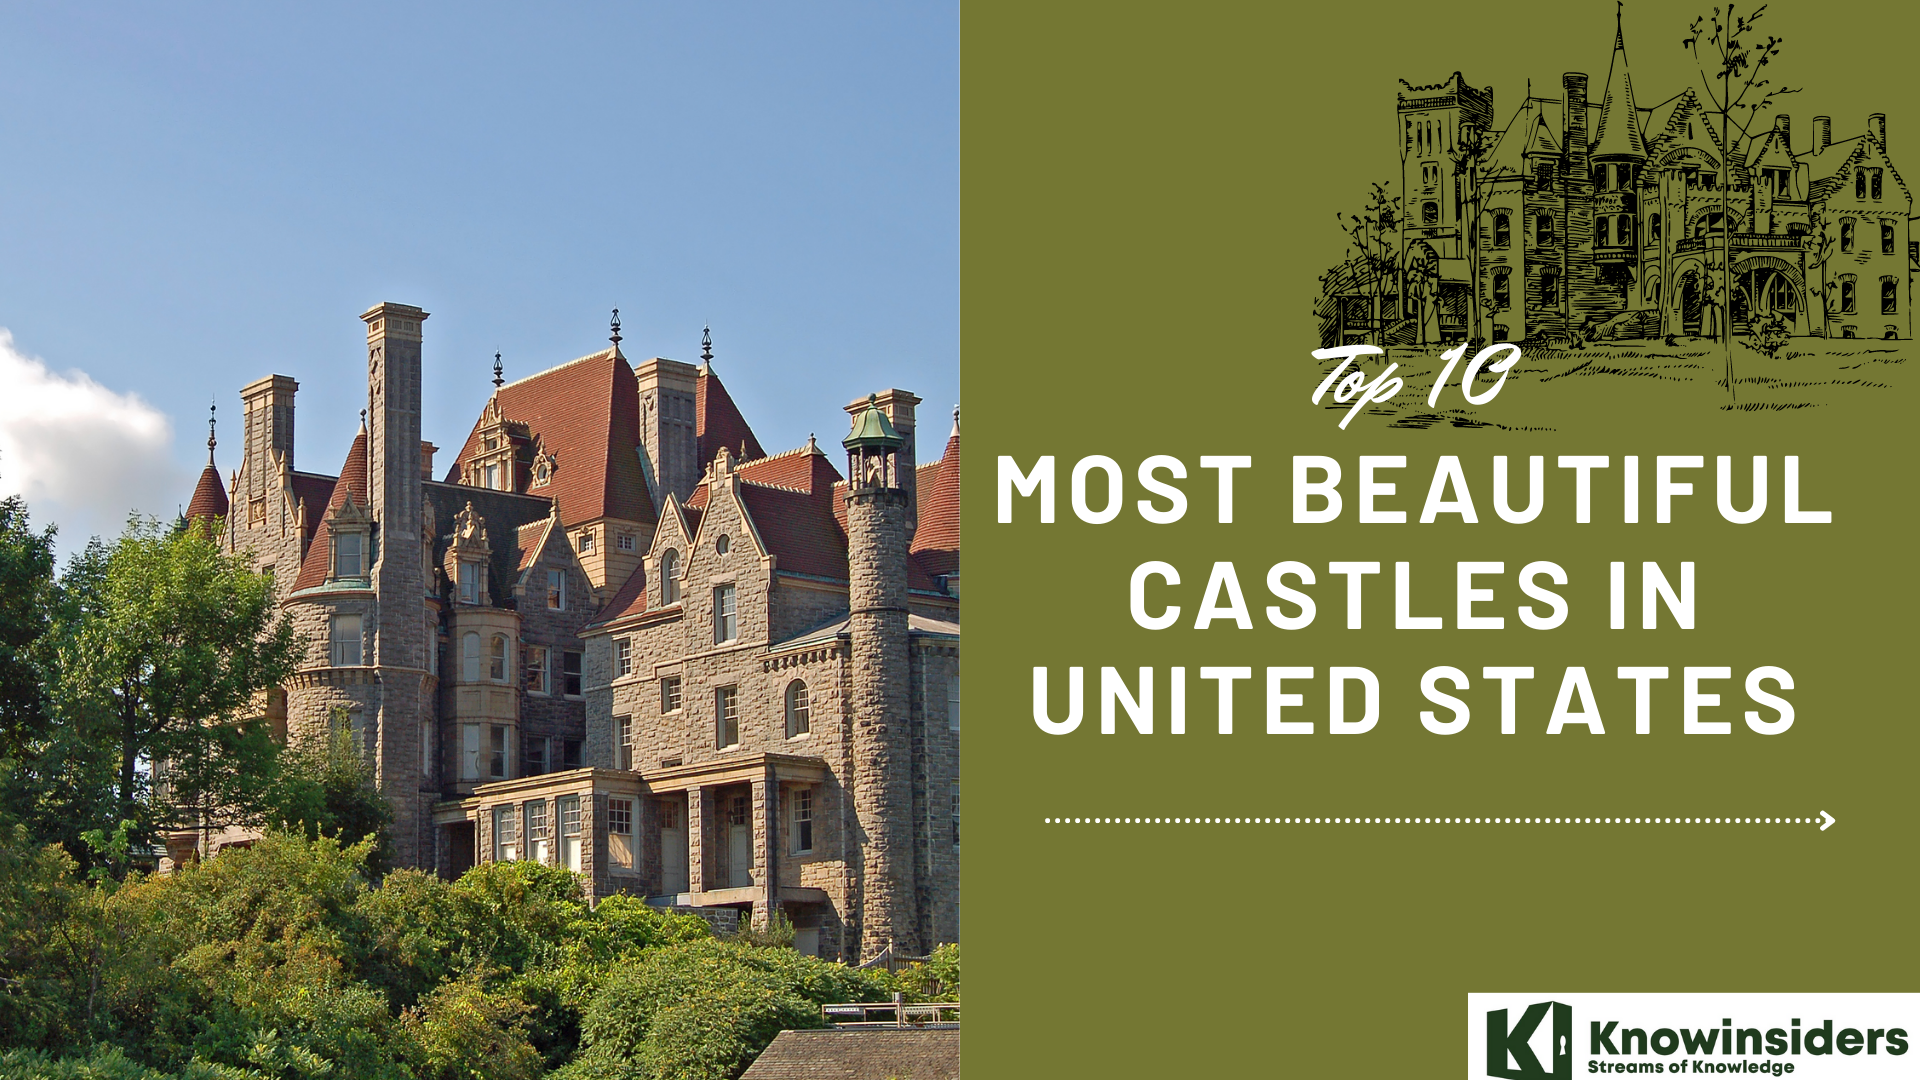 Top 10 Most Beautiful Castles in the United States